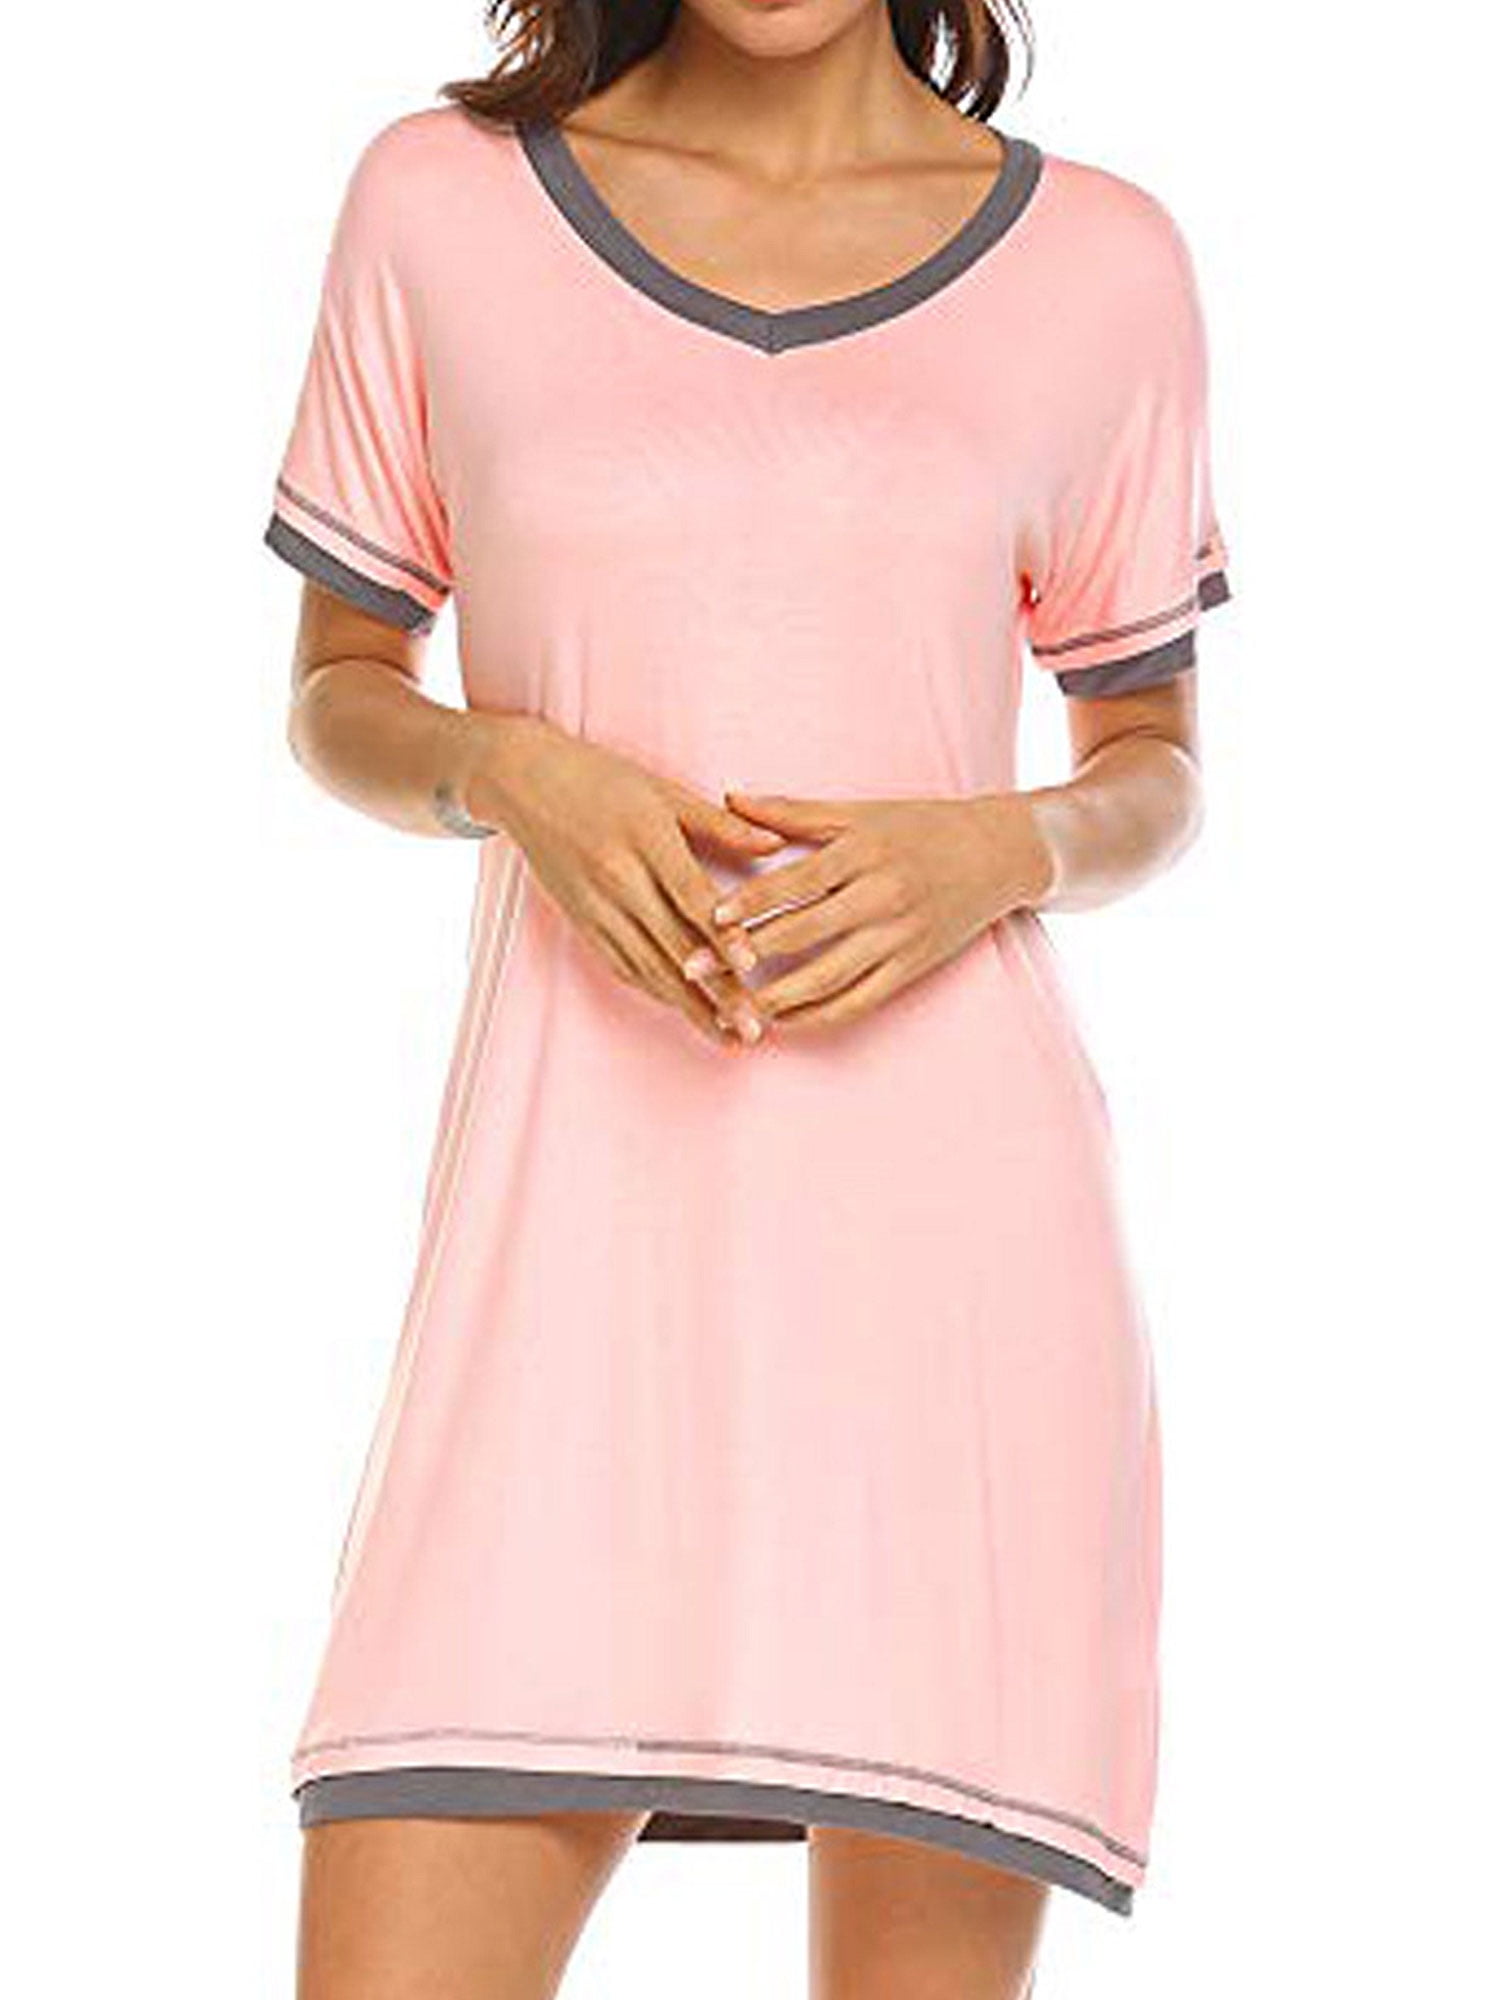 Womens Clothing Nightwear and sleepwear Nightgowns and sleepshirts Hanro Cotton Deluxe Short Sleeve Nightdress in Blue 